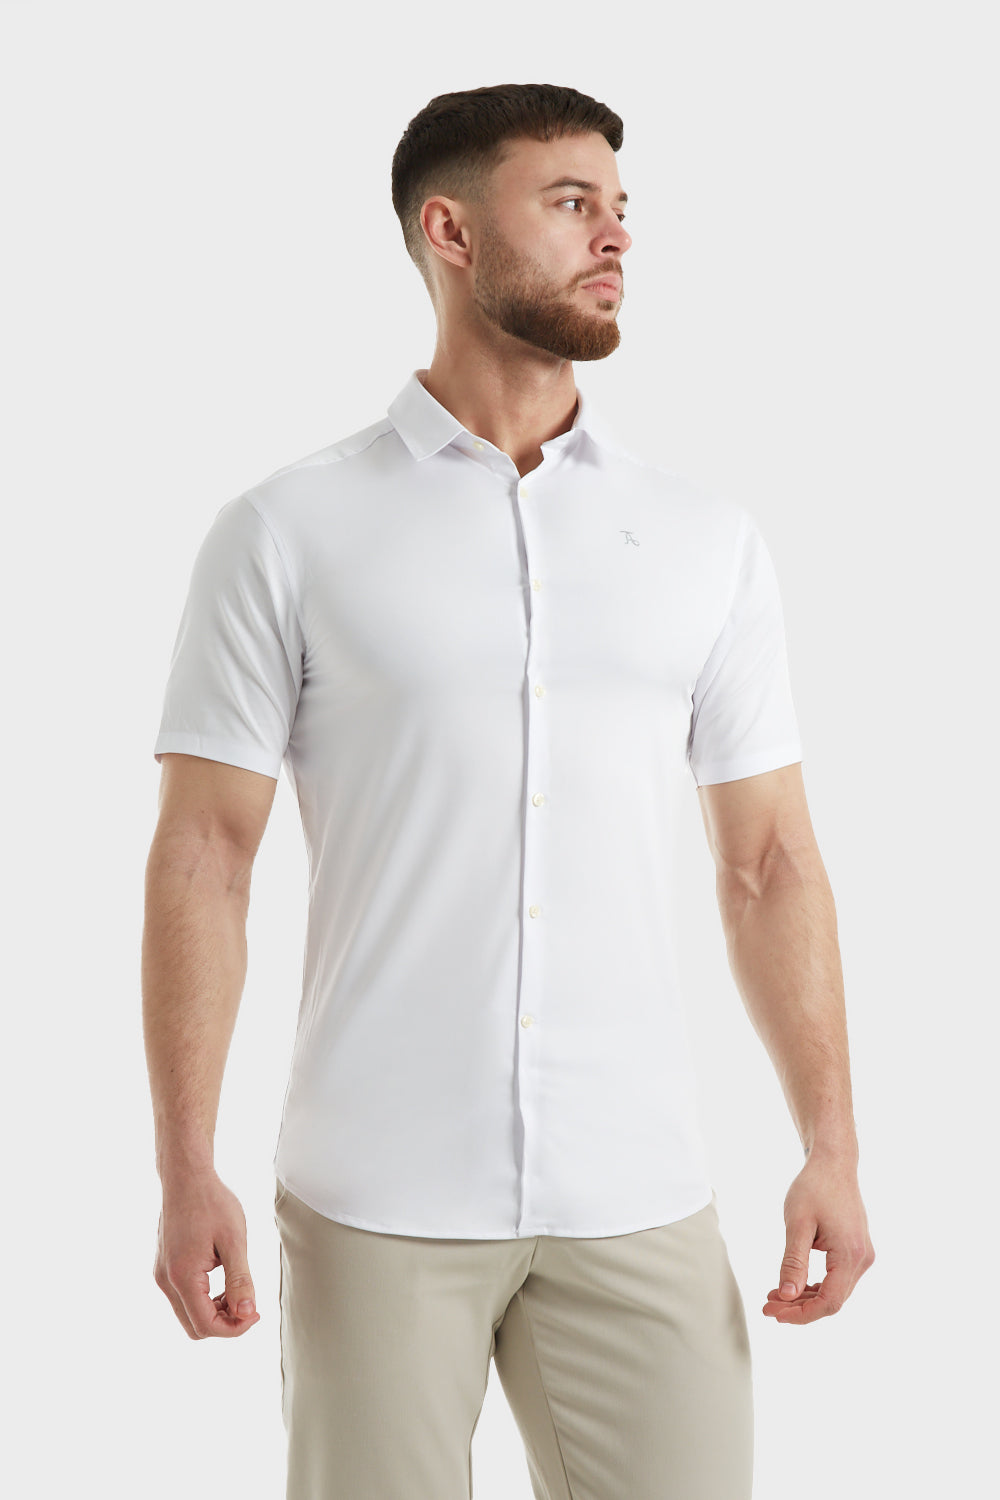 Muscle Fit Bamboo Shirt in White - TAILORED ATHLETE - ROW